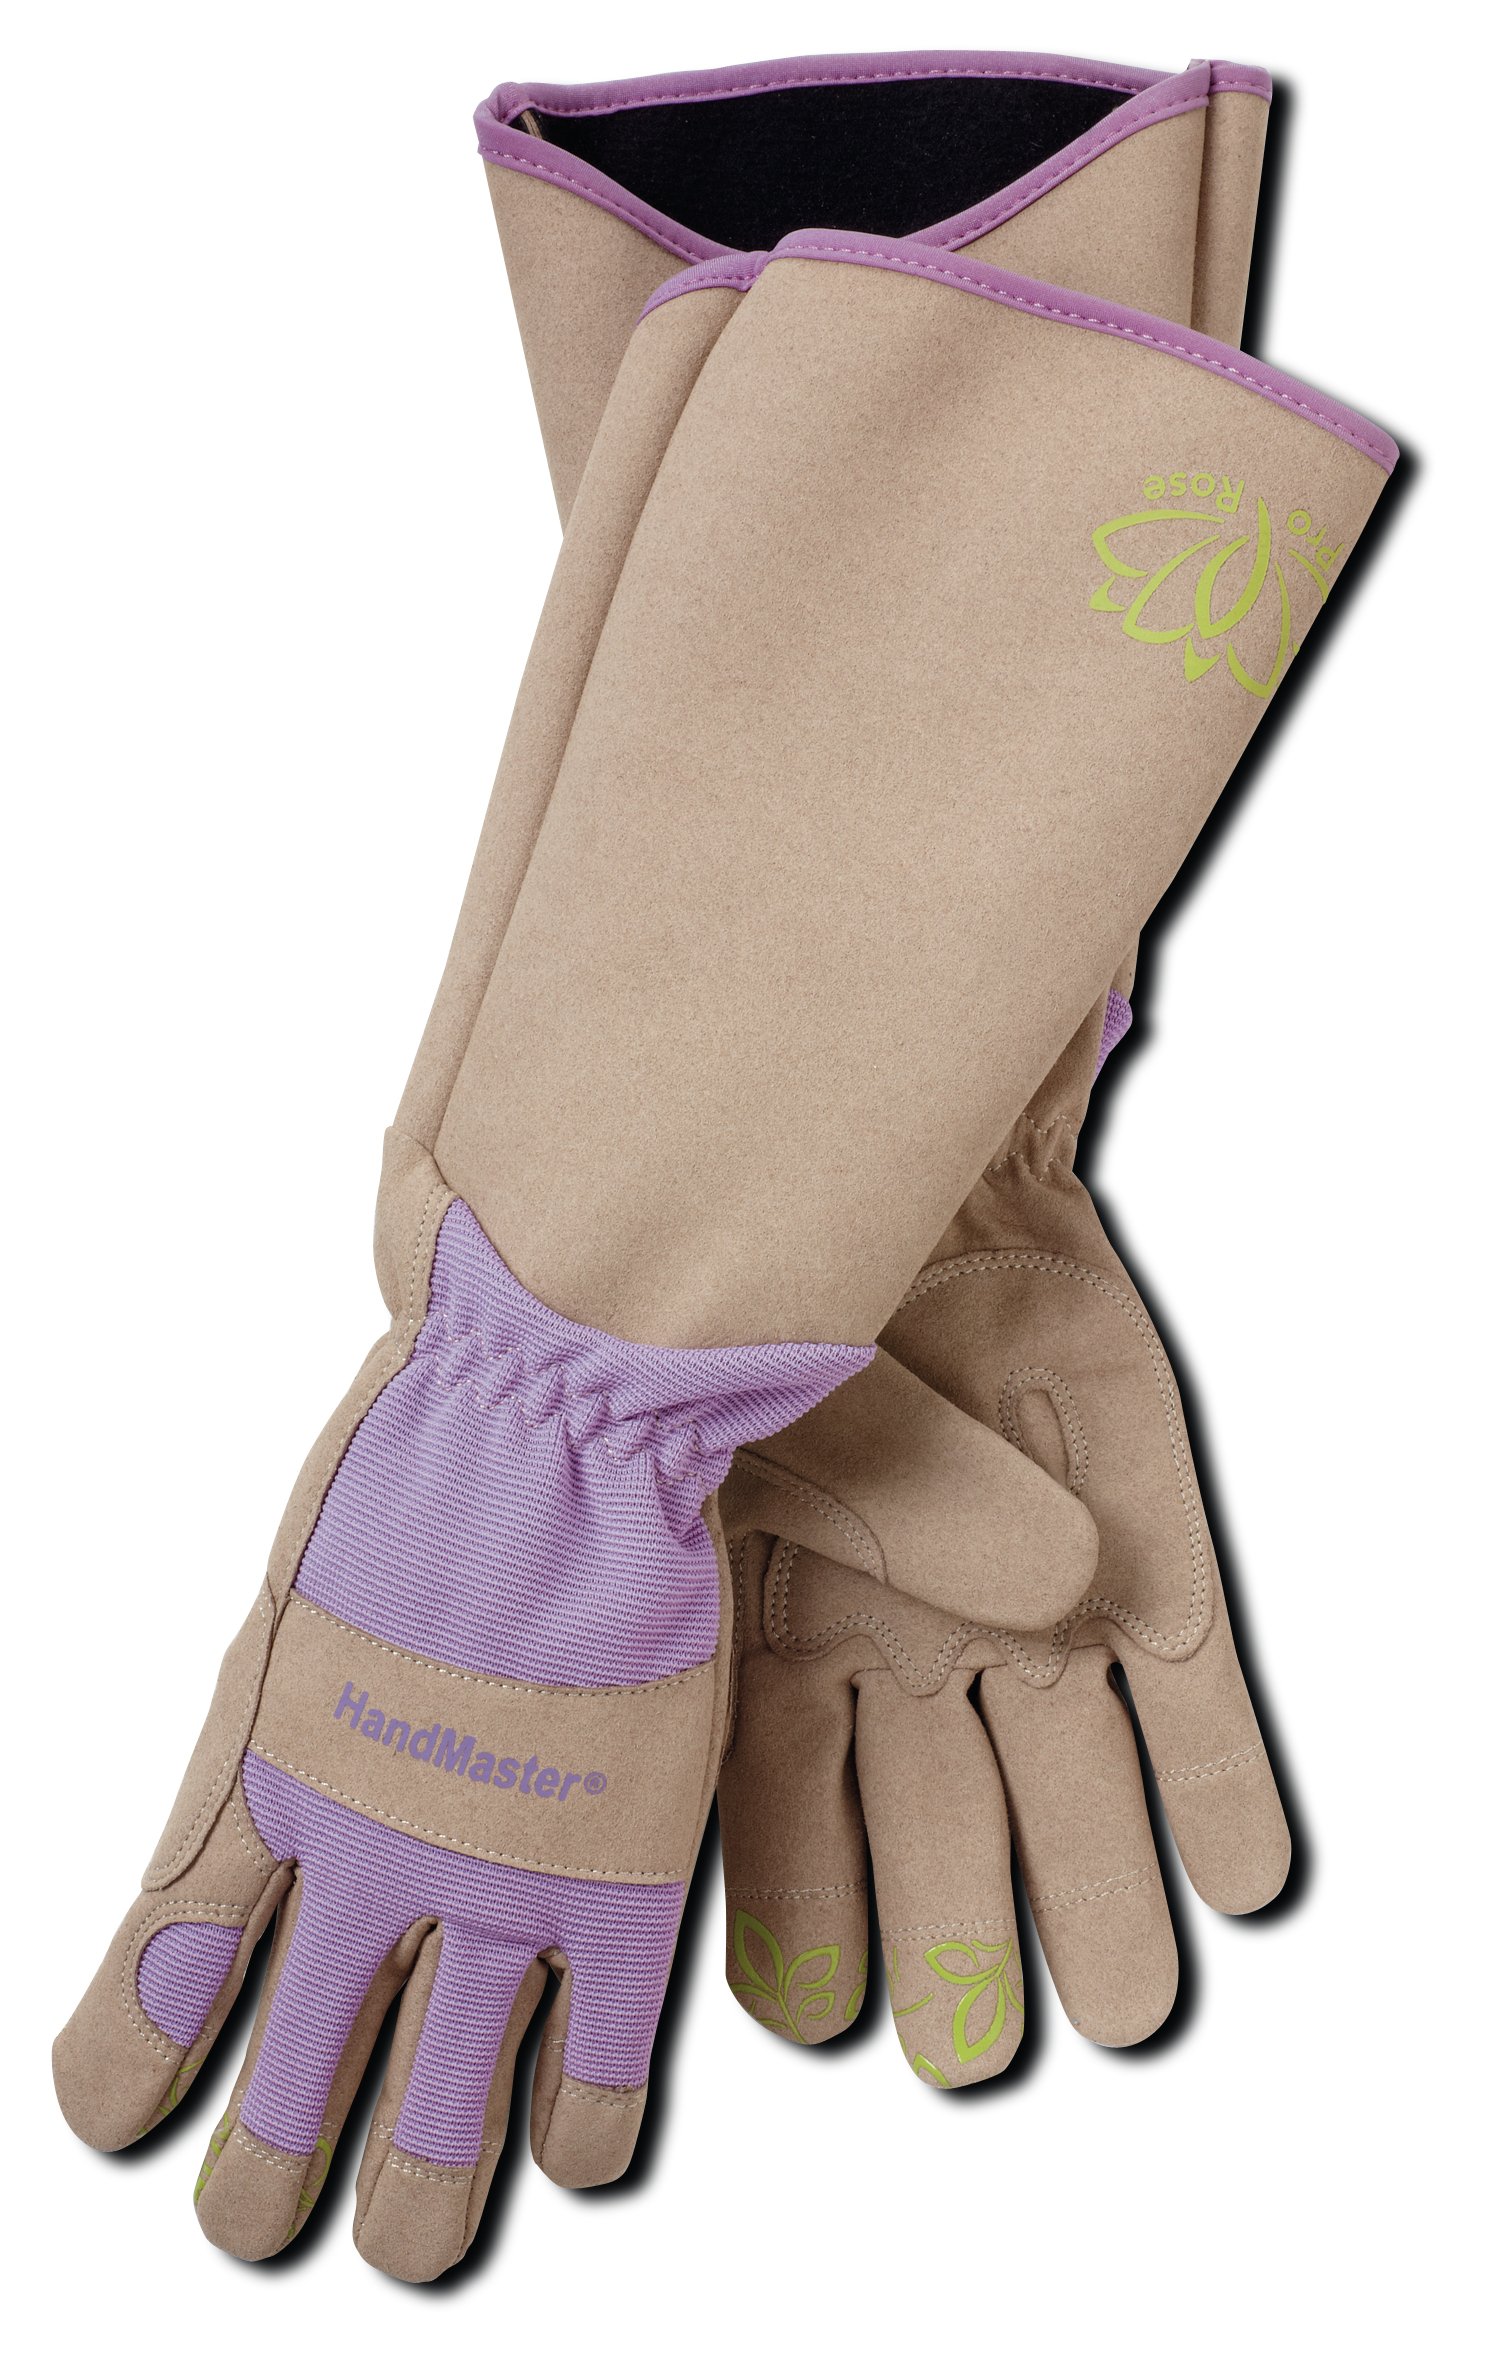 Professional Rose Pruning Thornproof Gardening Gloves with Extra Long Forearm Protection for Women (BE195T-S) - Puncture Resistant, Small (1 Pair) - image 2 of 2